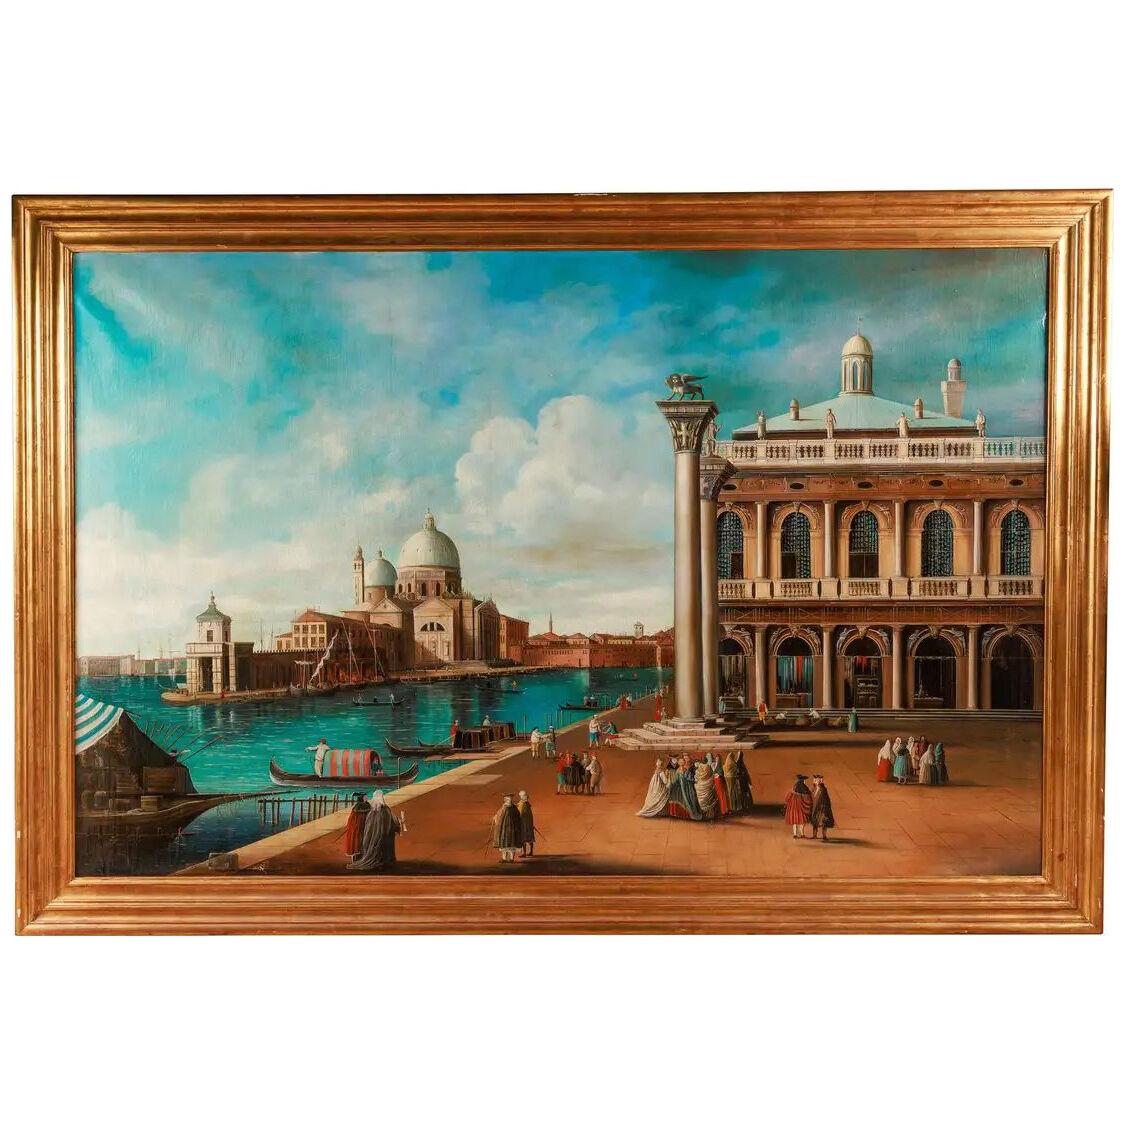 Follower of Giovanni Antonio Canal, Called Canaletto, A Monumental Painting